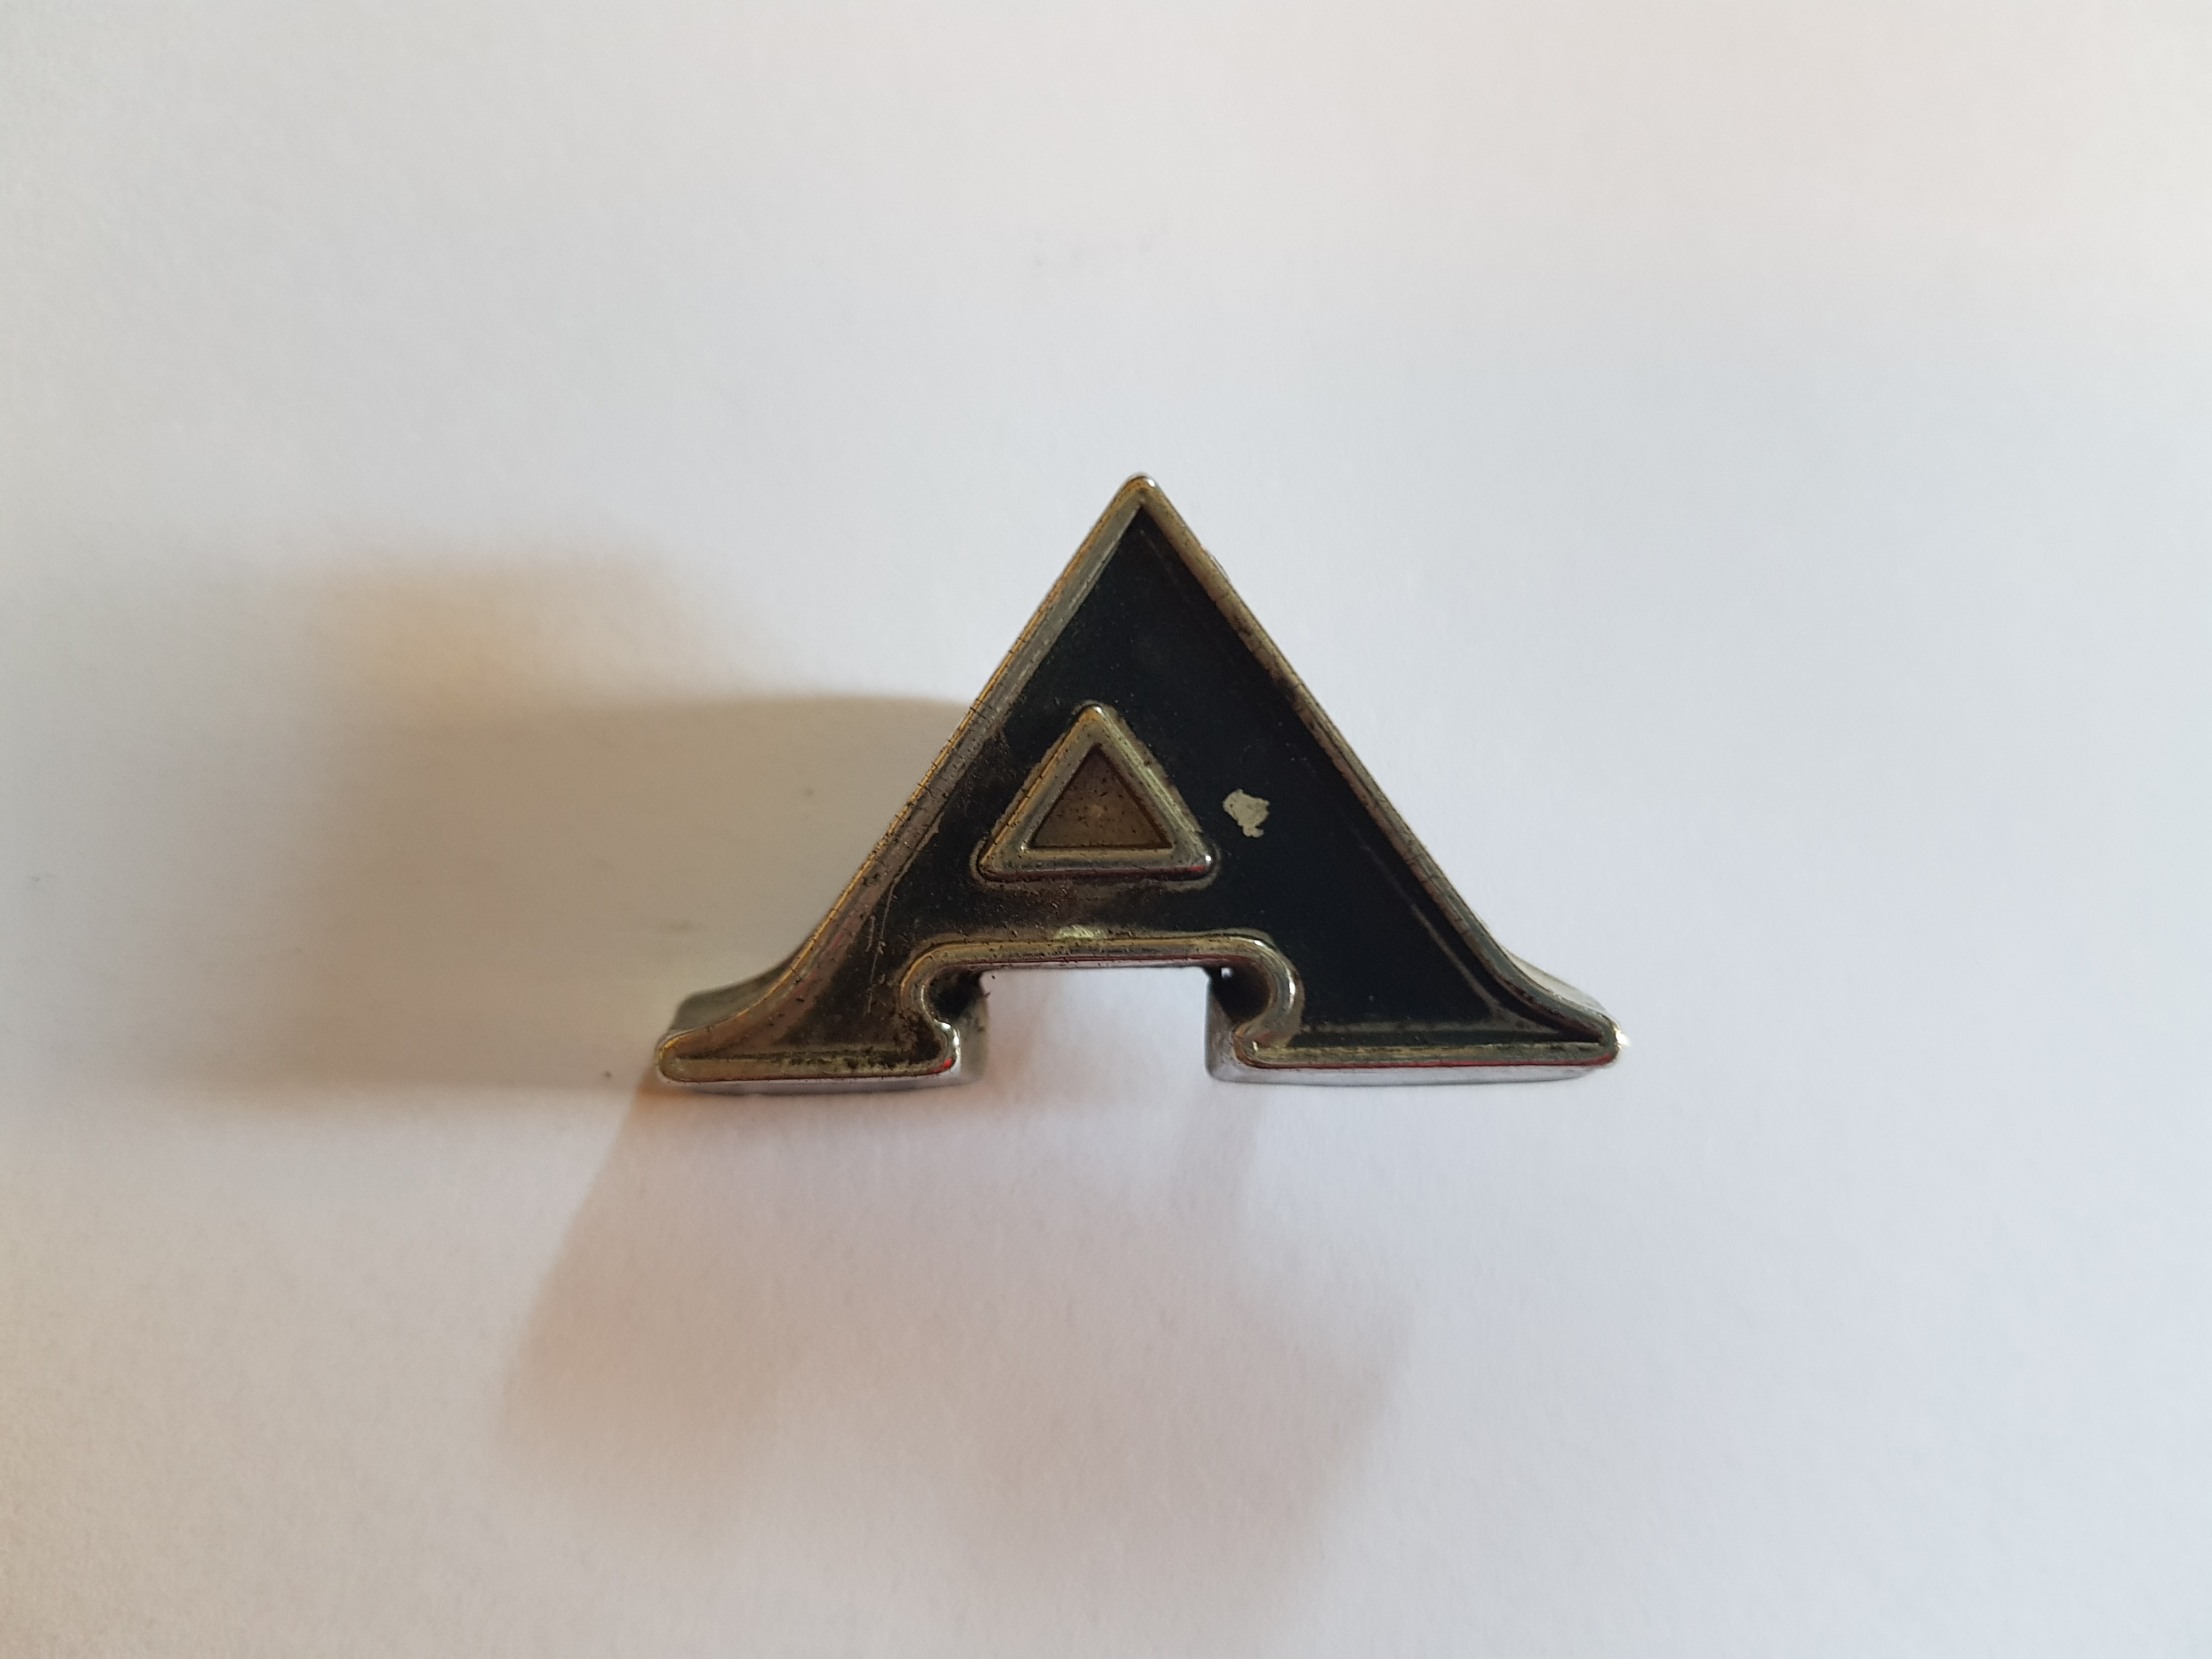 'A' Boot Letter Badge, Salvaged